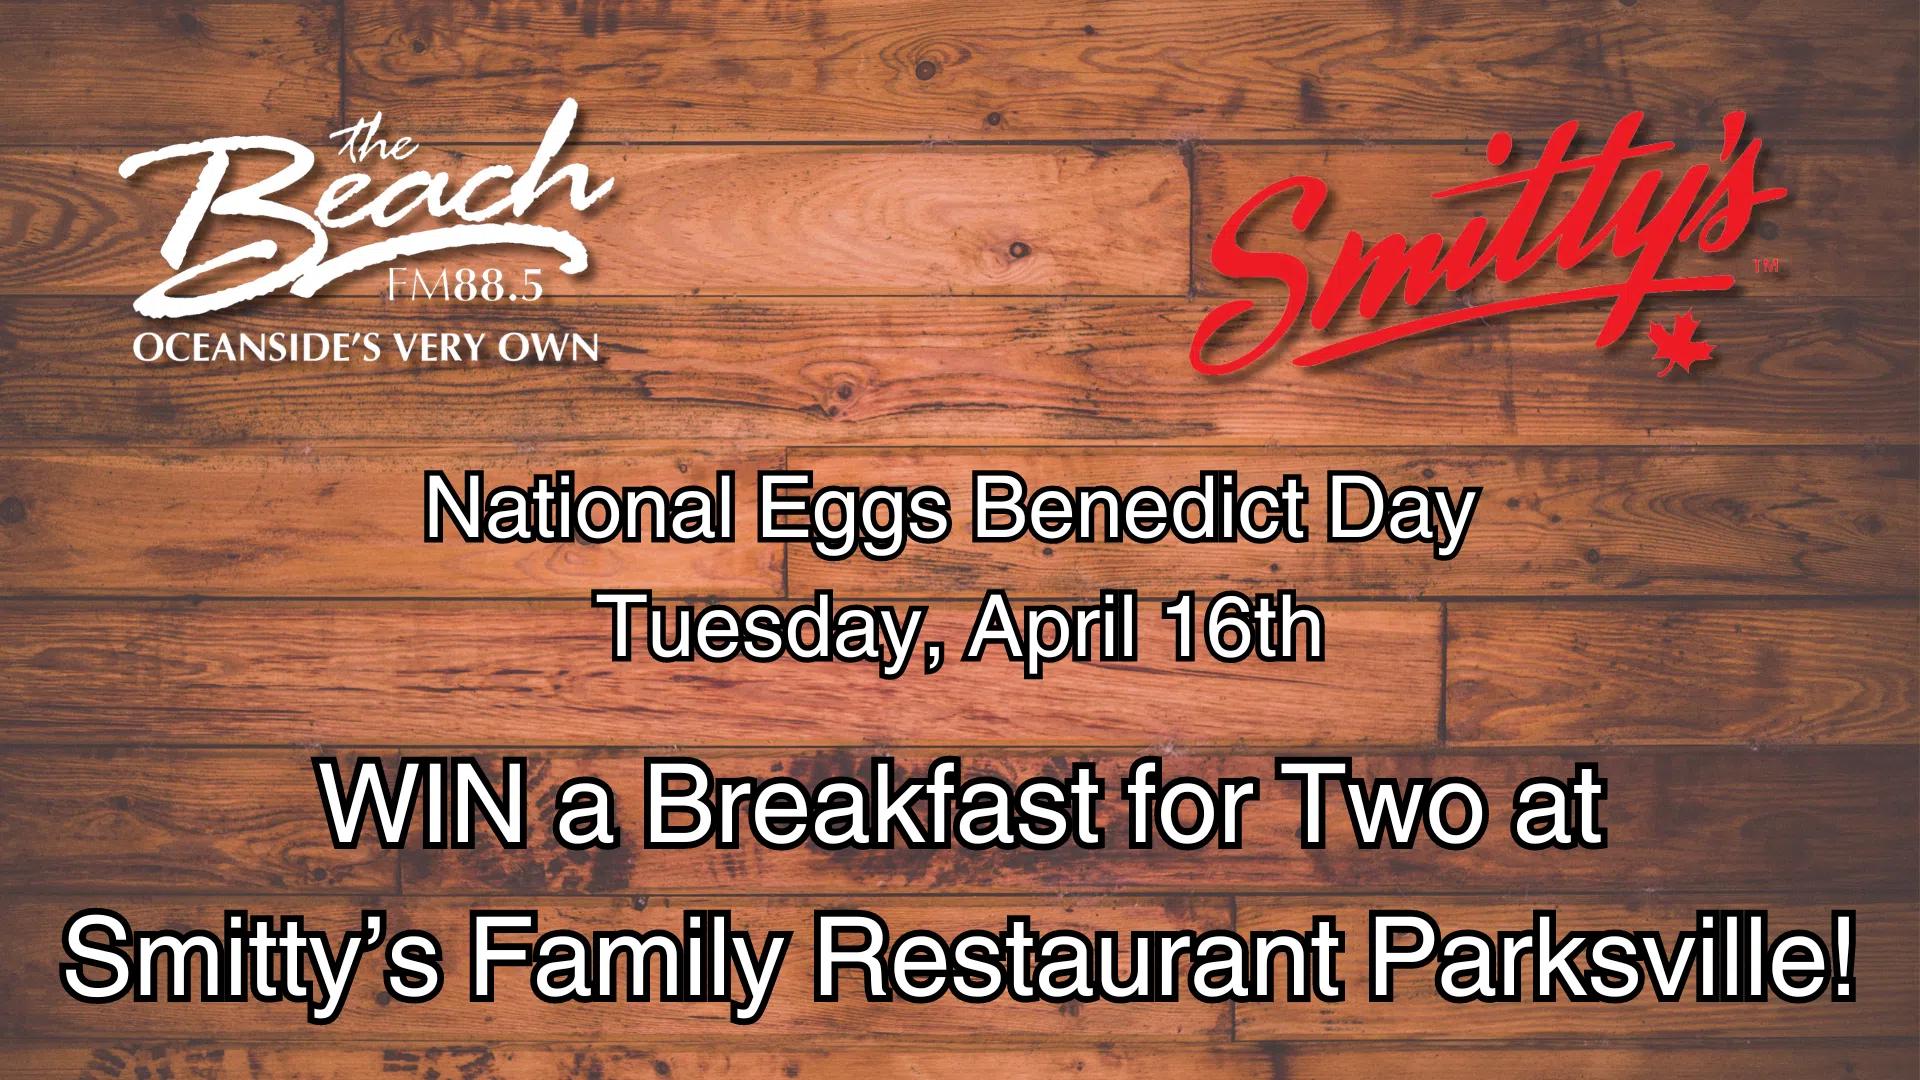 WIN a Breakfast for TWO at Smitty's!